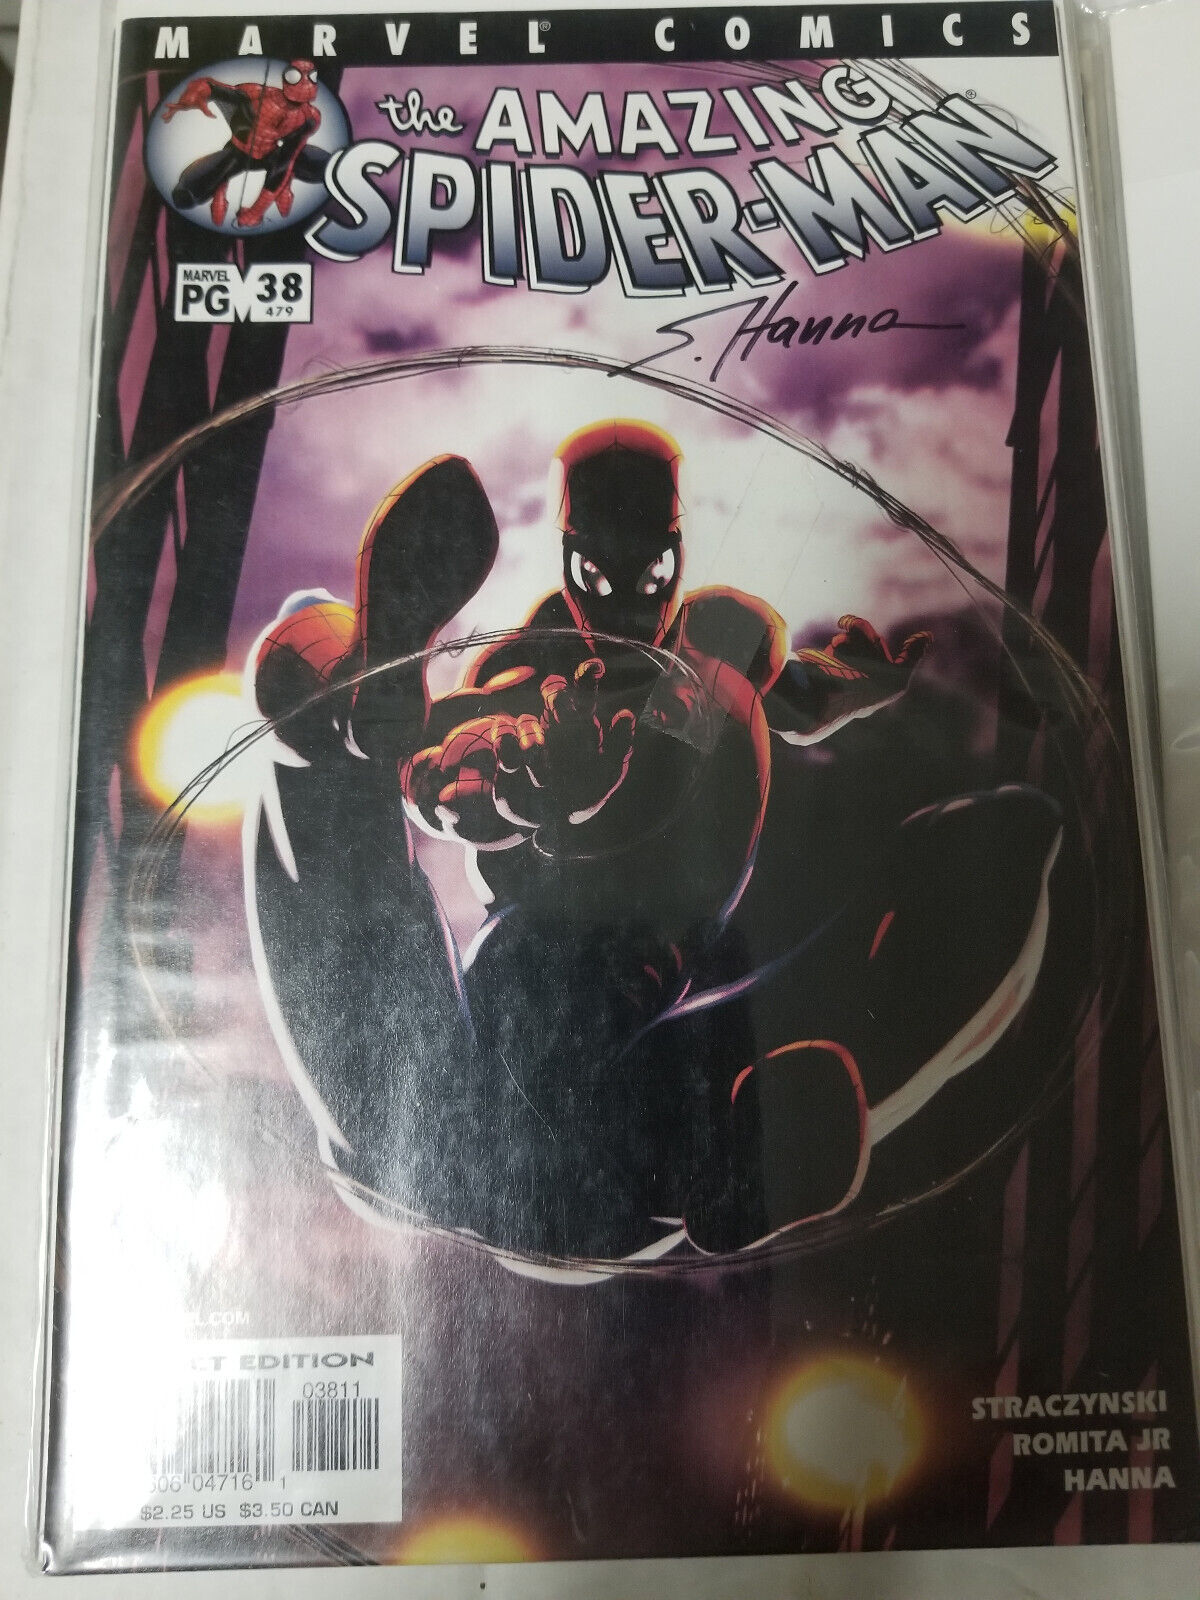 New Amazing Spider-Man 38/479 signed by Scott Hanna at NYCC 